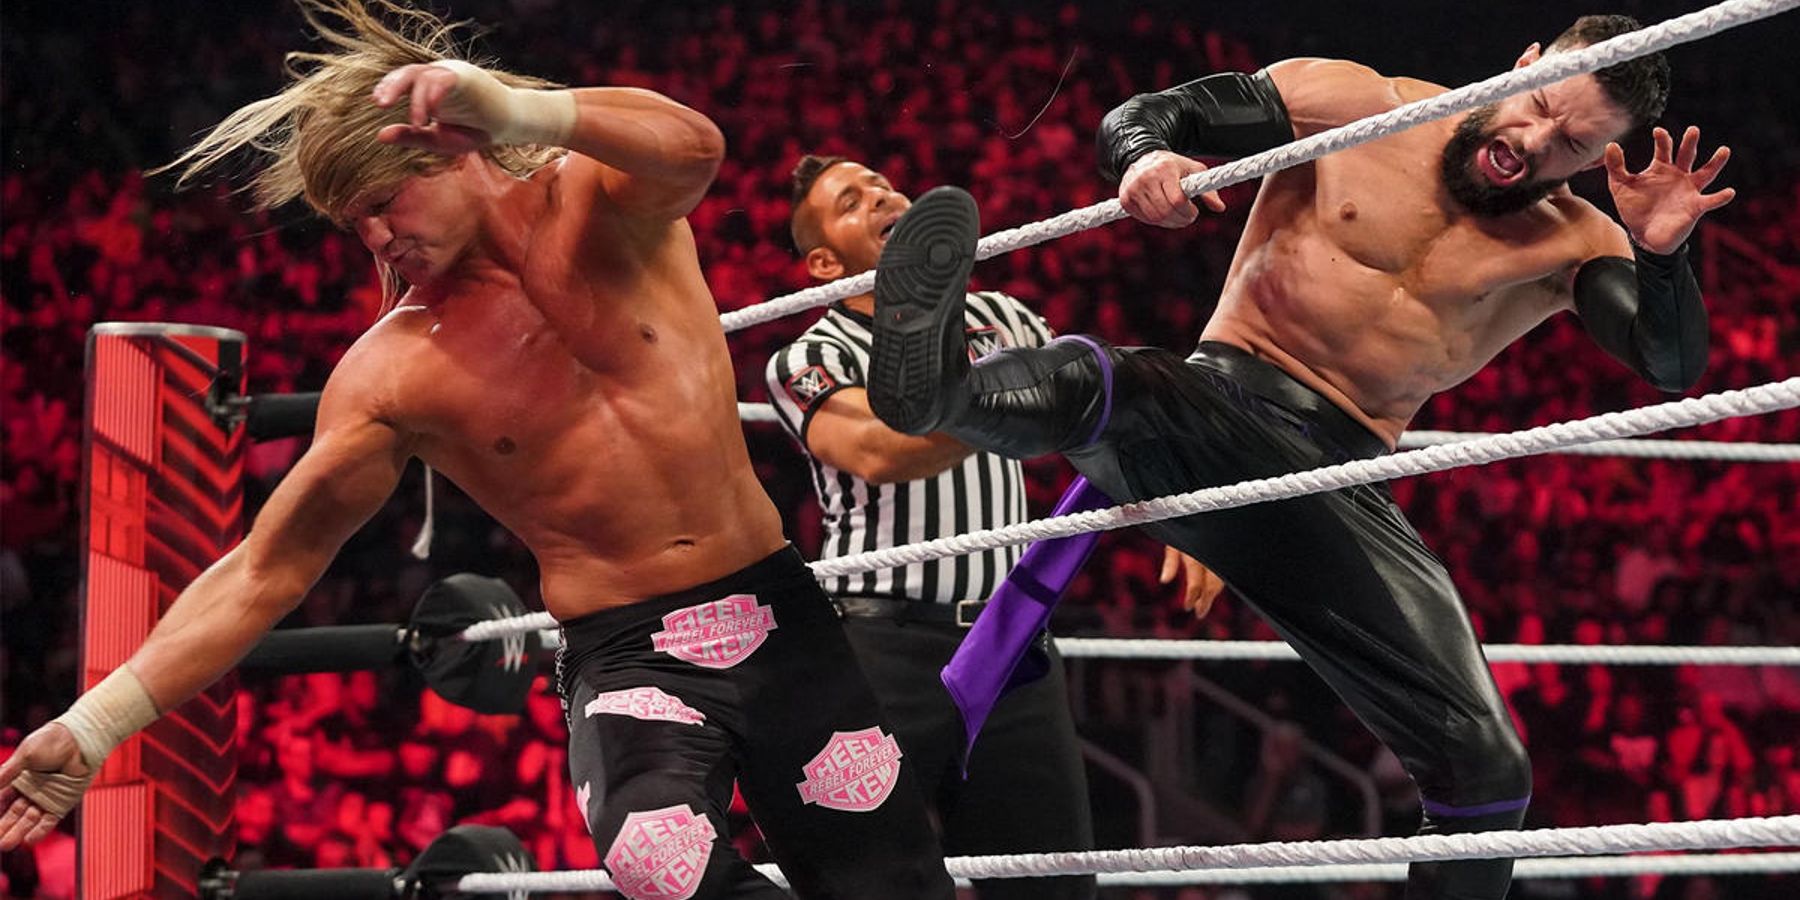 Dolph Ziggler gets booted off of the ring apron by Finn Balor during a match on WWE Raw in 2022.